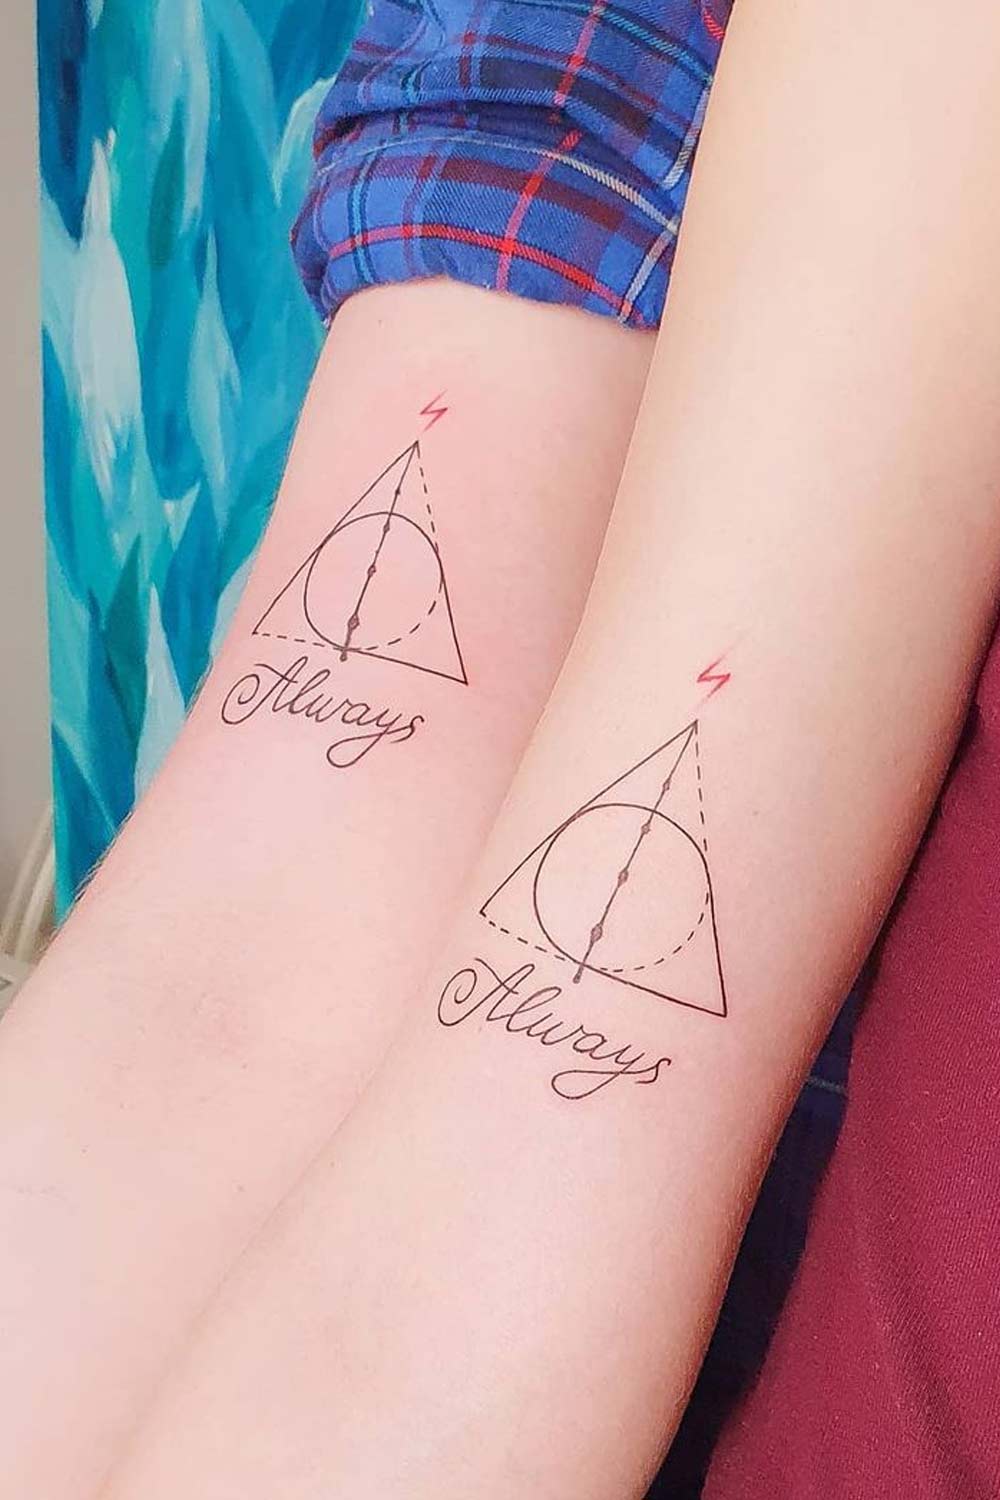 Pottermore - More Than An Insider - Shared by a fan - Sophia: My mum and I  got a new tattoo , but of a different Snape quote, not you everyday “always”  😊 | Facebook